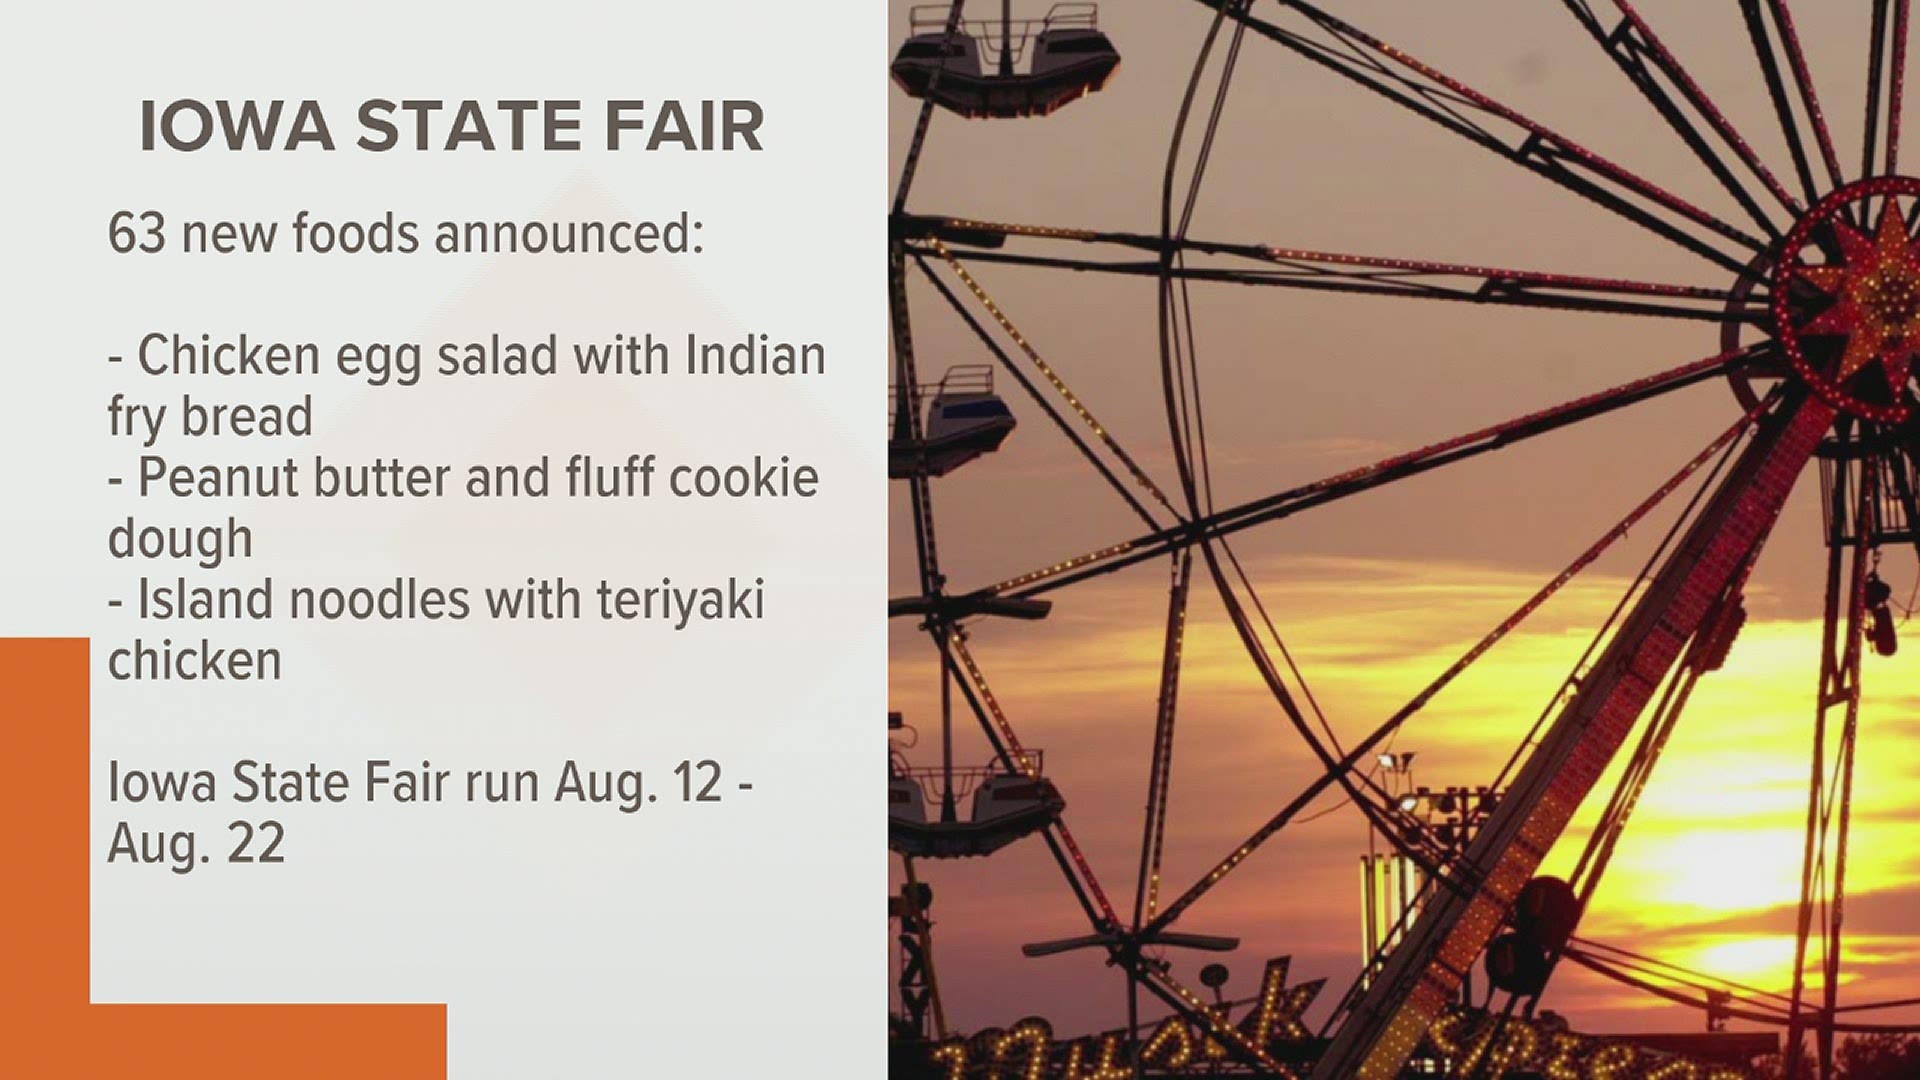 Between Aug. 12-16, fairgoers will be able to sample the three finalists and cast their vote for the best new fair food.